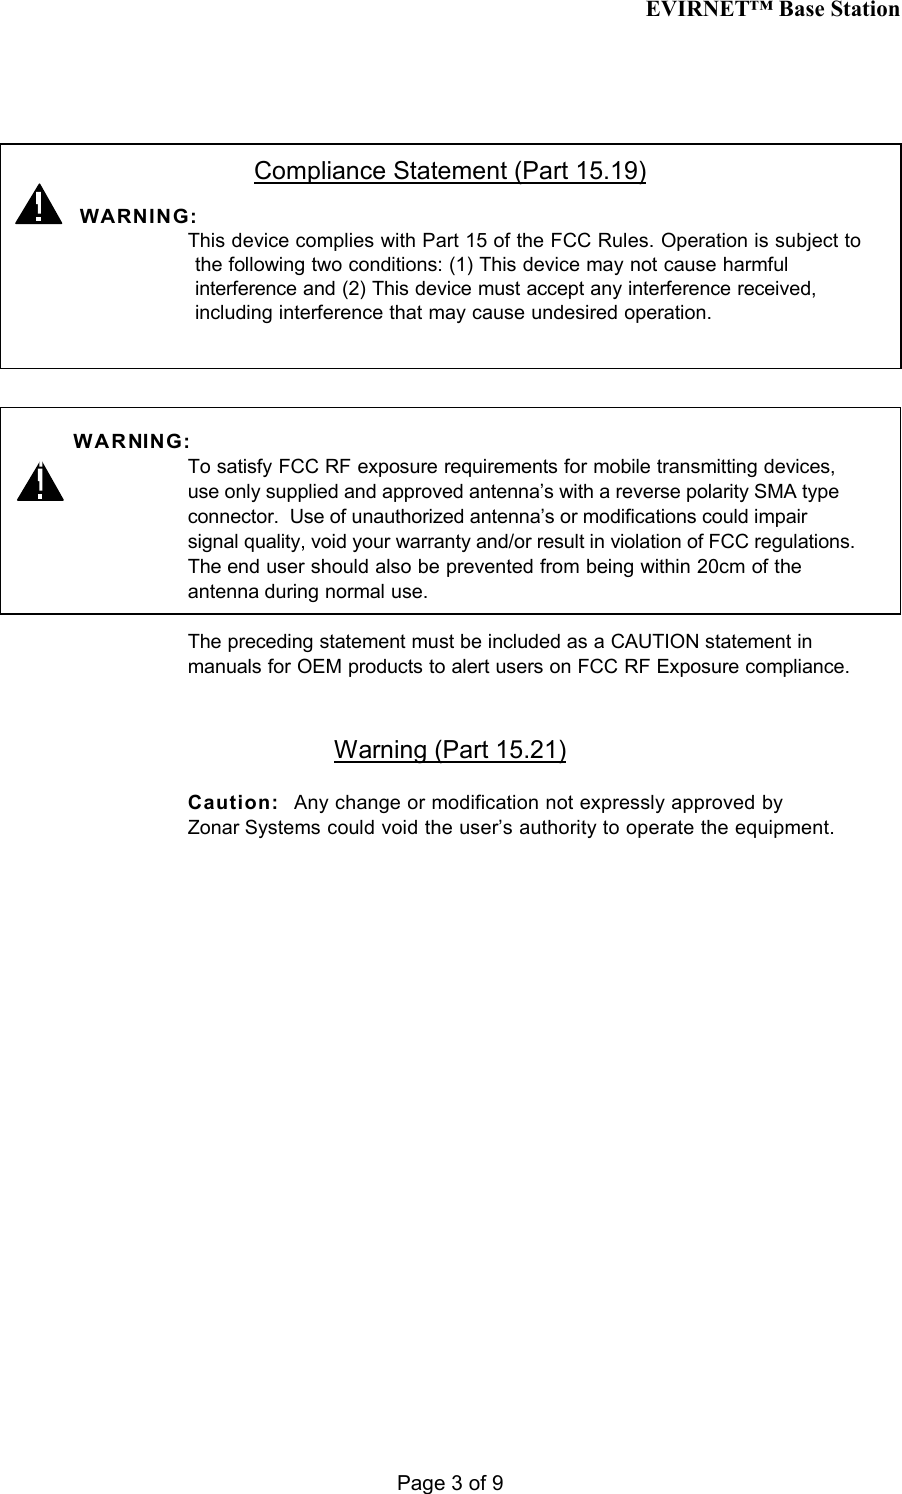 EVIRNET™ Base Station Page 3 of 9    Compliance Statement (Part 15.19)   WARNING:    This device complies with Part 15 of the FCC Rules. Operation is subject to the following two conditions: (1) This device may not cause harmful interference and (2) This device must accept any interference received, including interference that may cause undesired operation.     WA RNING:    To satisfy FCC RF exposure requirements for mobile transmitting devices, use only supplied and approved antenna’s with a reverse polarity SMA type connector.  Use of unauthorized antenna’s or modifications could impair signal quality, void your warranty and/or result in violation of FCC regulations.  The end user should also be prevented from being within 20cm of the antenna during normal use.  The preceding statement must be included as a CAUTION statement in manuals for OEM products to alert users on FCC RF Exposure compliance.   Warning (Part 15.21)  Caution:   Any change or modification not expressly approved by Zonar Systems could void the user’s authority to operate the equipment. 